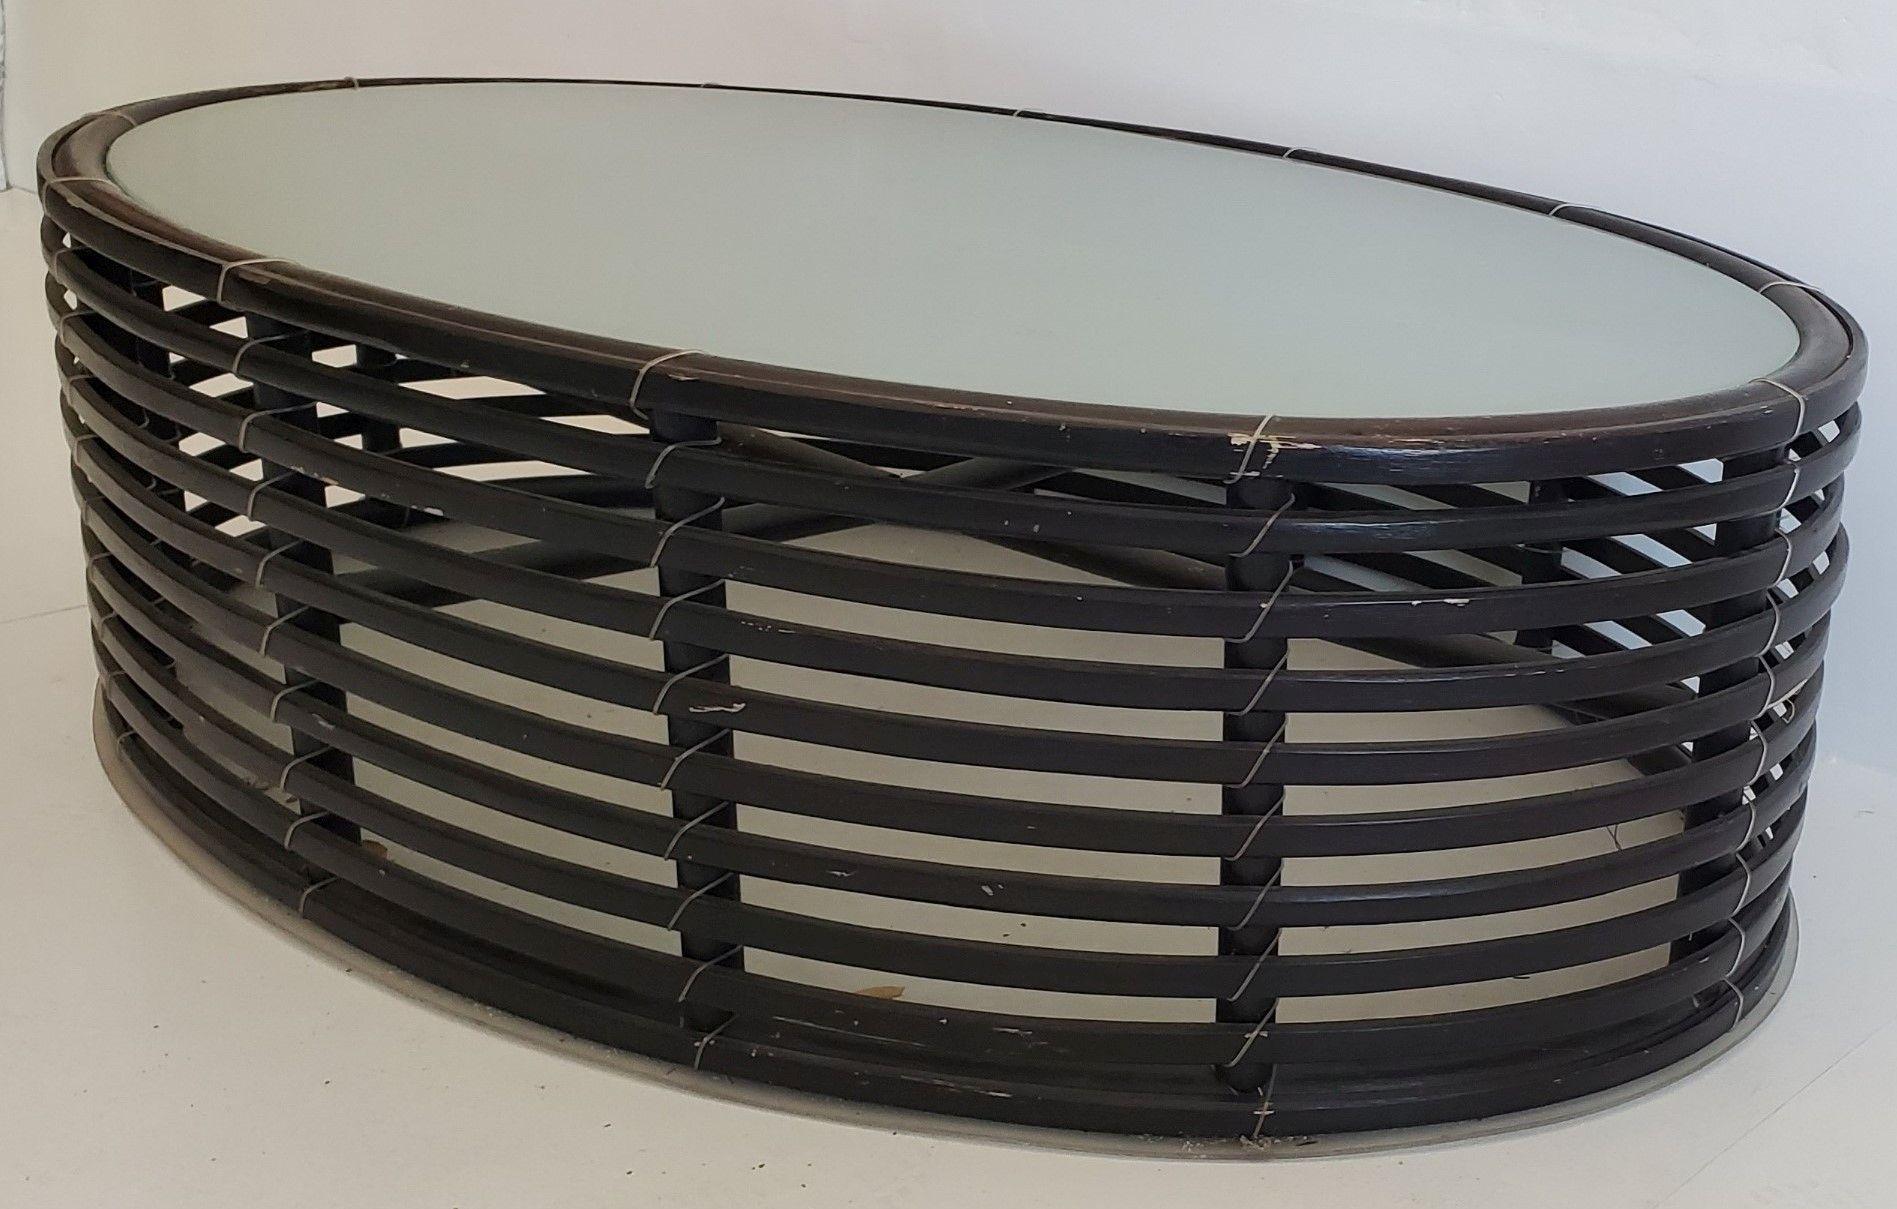 Lolah Kenneth Wood Large Wood And Glass Coffee Table

Smoked Glass 1/4 inch thick
Black Painted wood
PVC type bas.